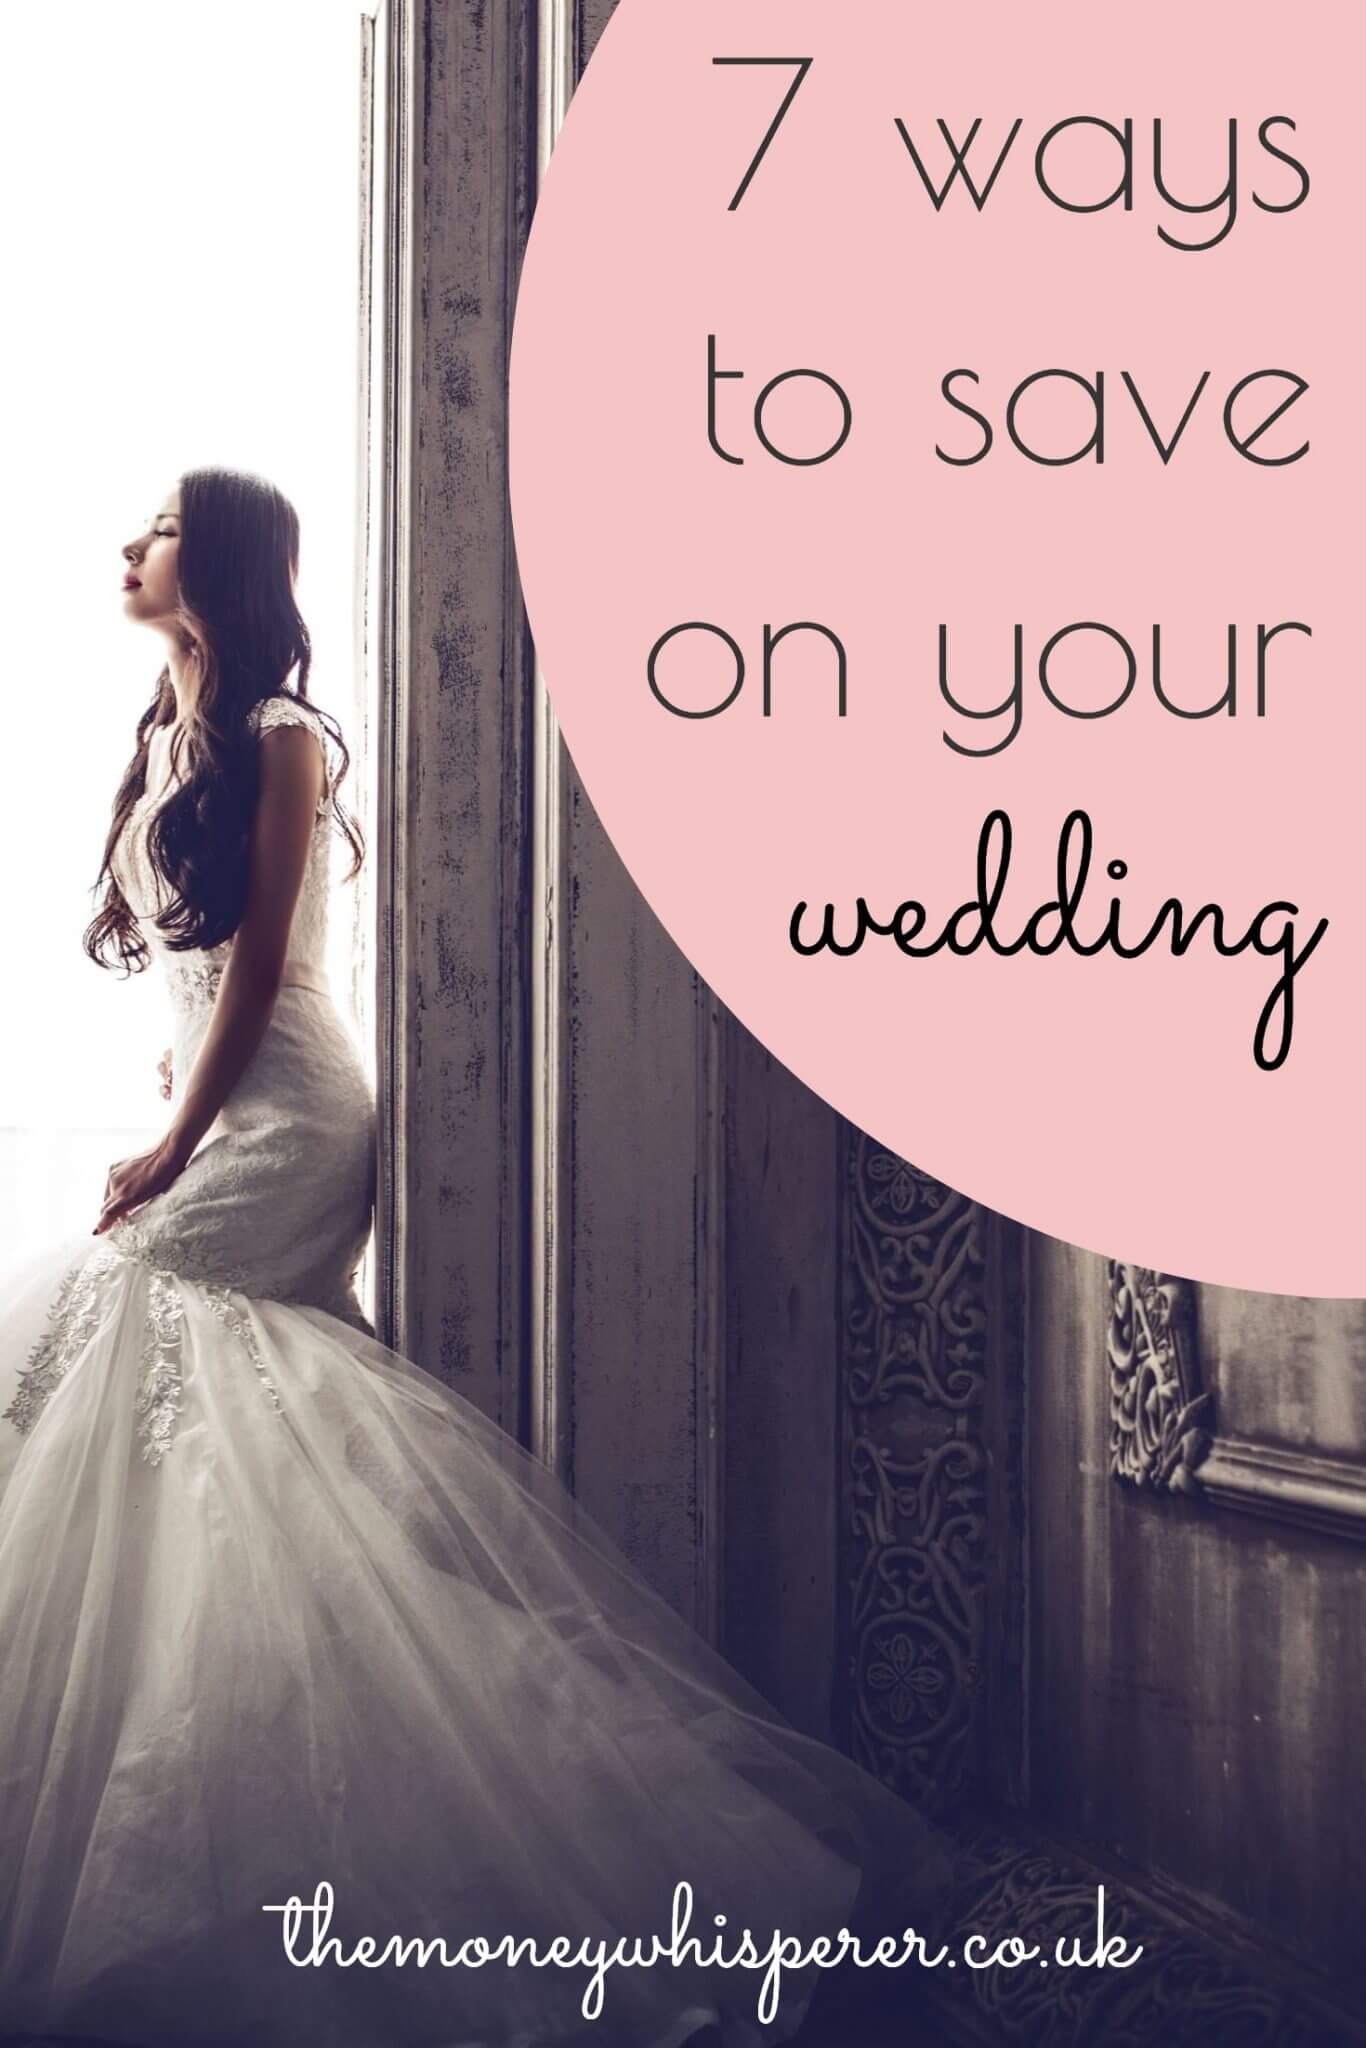 7 Ways To Save On Your Wedding - from flowers to who to invite, see these top tips for bringing down the cost of your wedding #wedding #savemoney